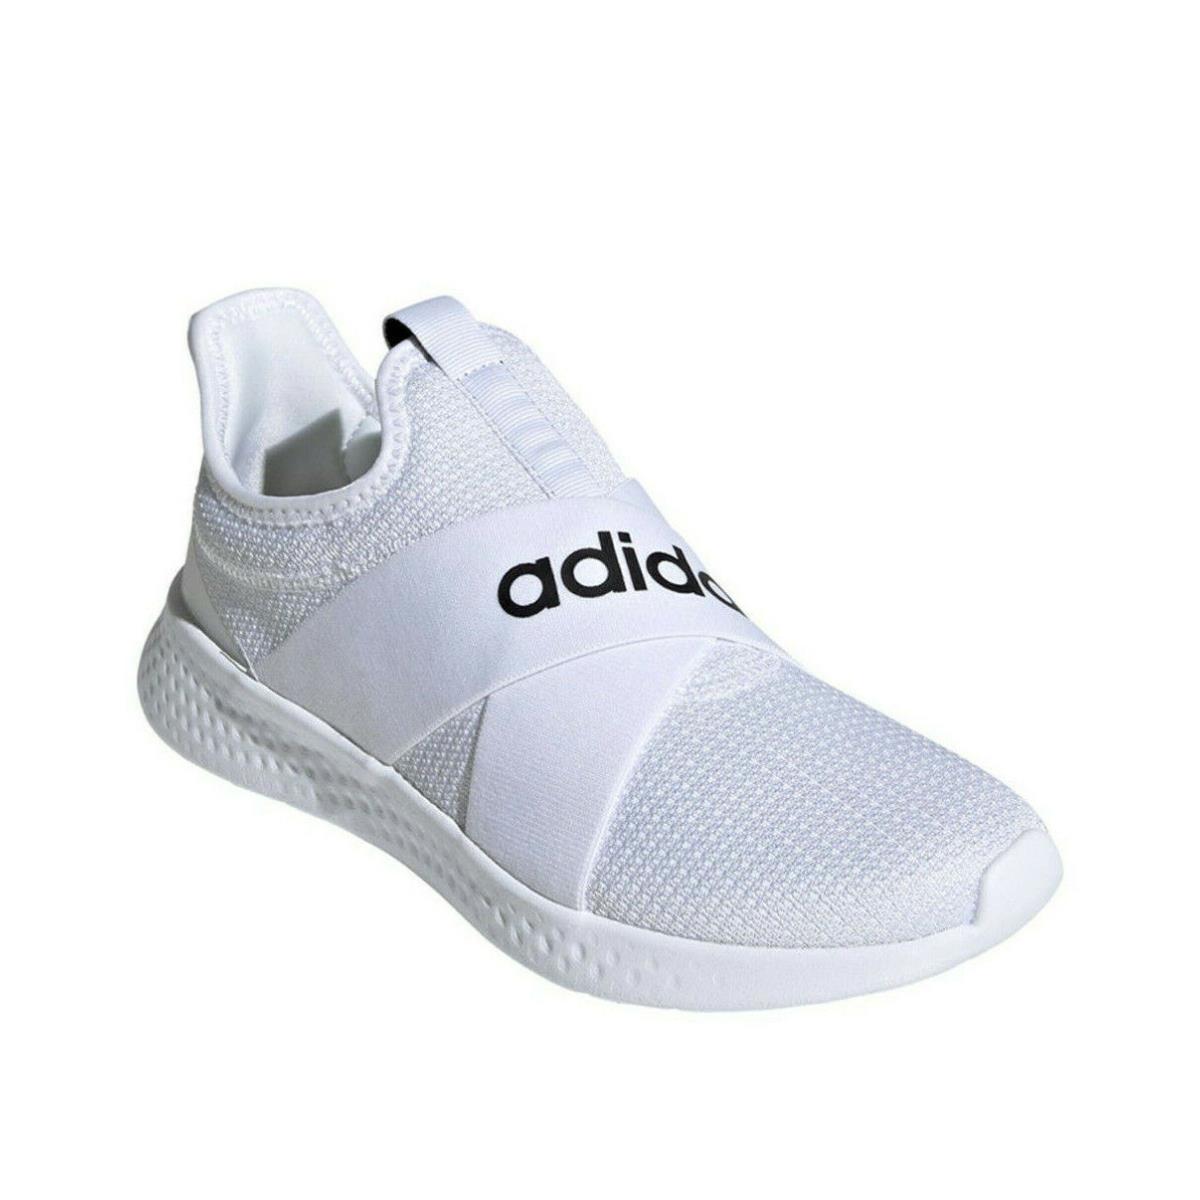 Adidas Puremotion Adapt Slip-on Sneaker Running Shoes White Silver Women`s - White/Silver